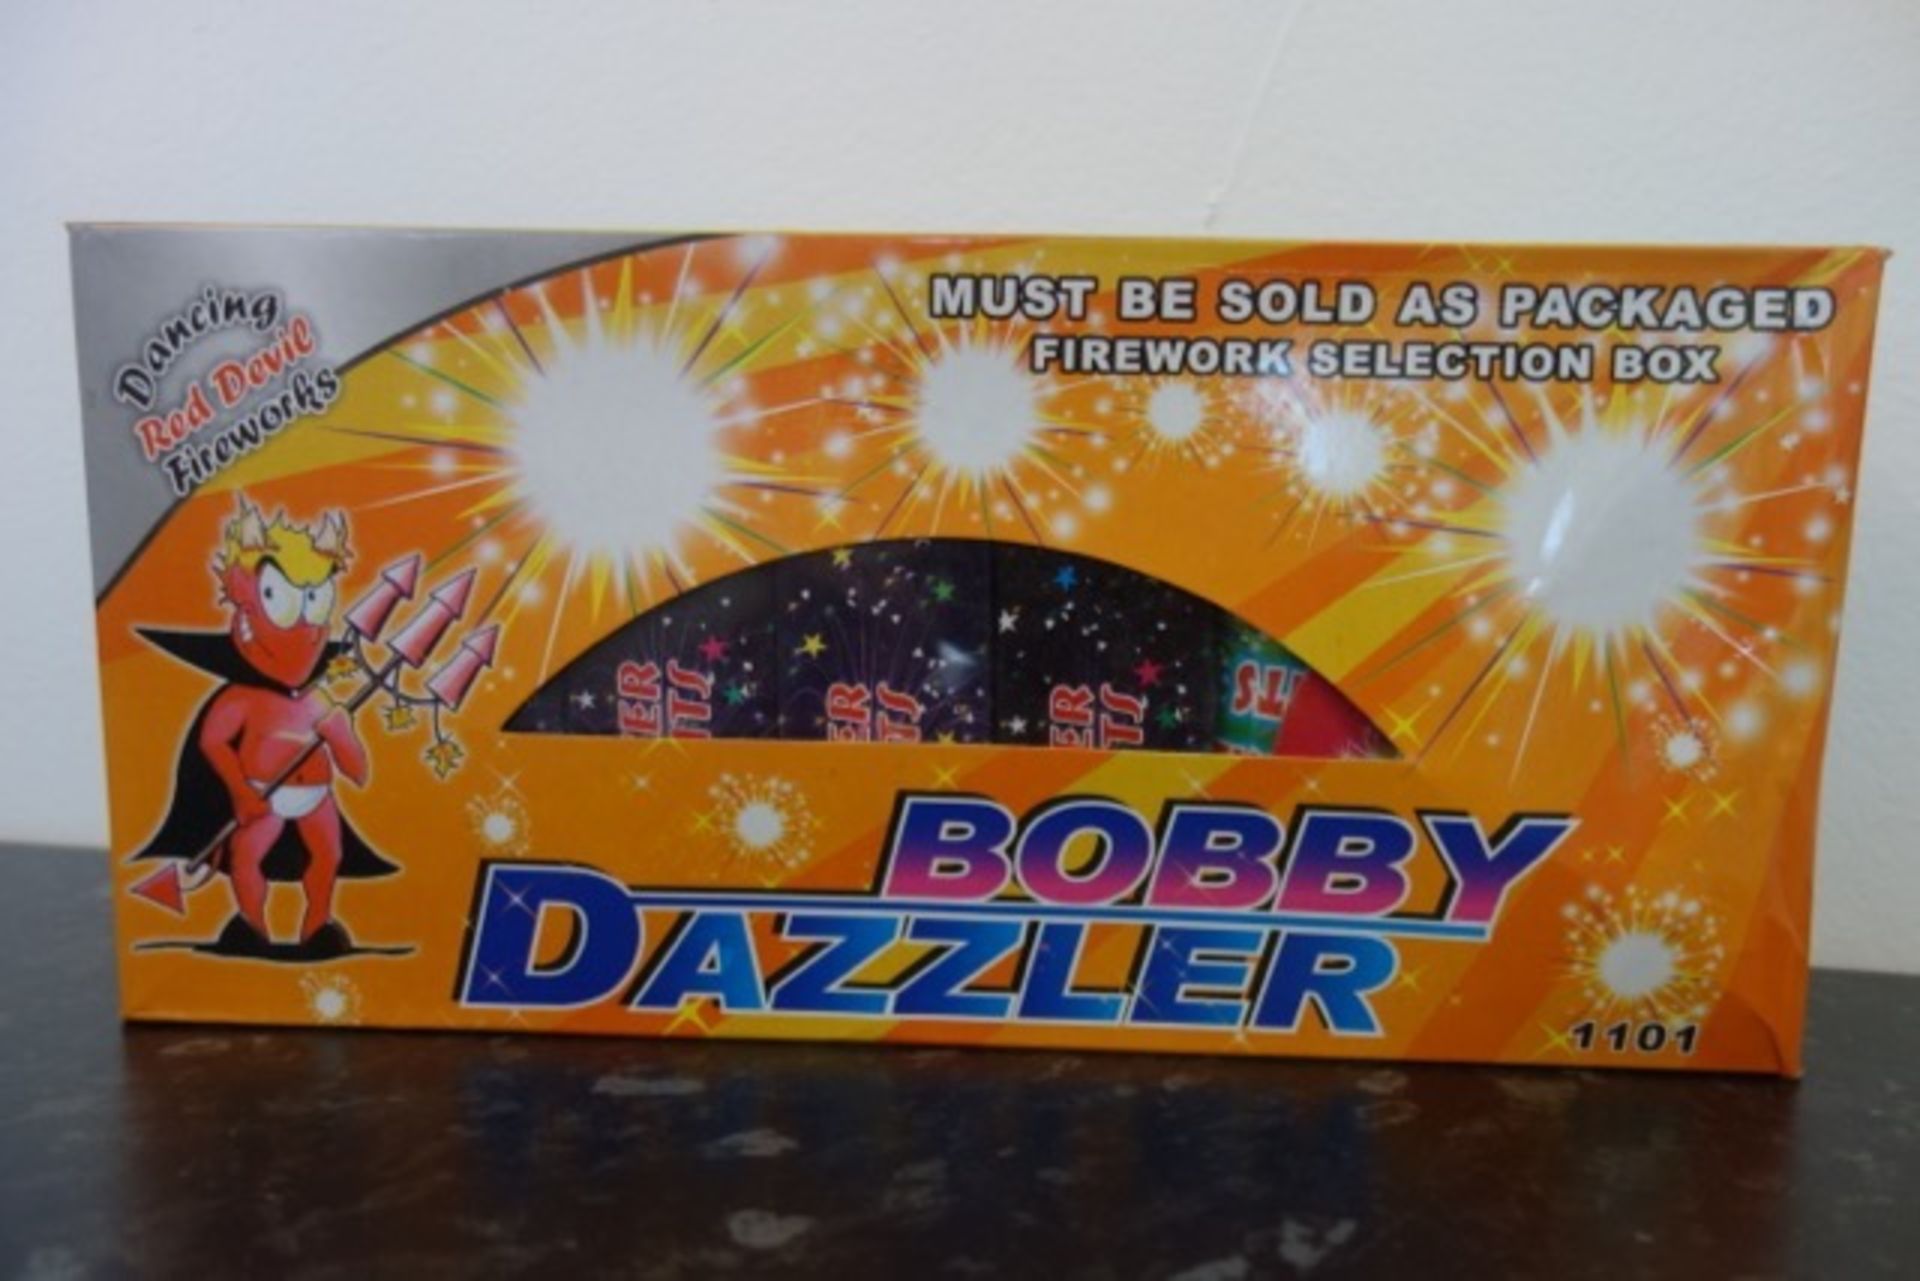 6 x Dancing Red Devil Fireworks - Bobby Dazzler 14 Piece Selection Boxes. Please note: NO DELIVERY - Image 2 of 2